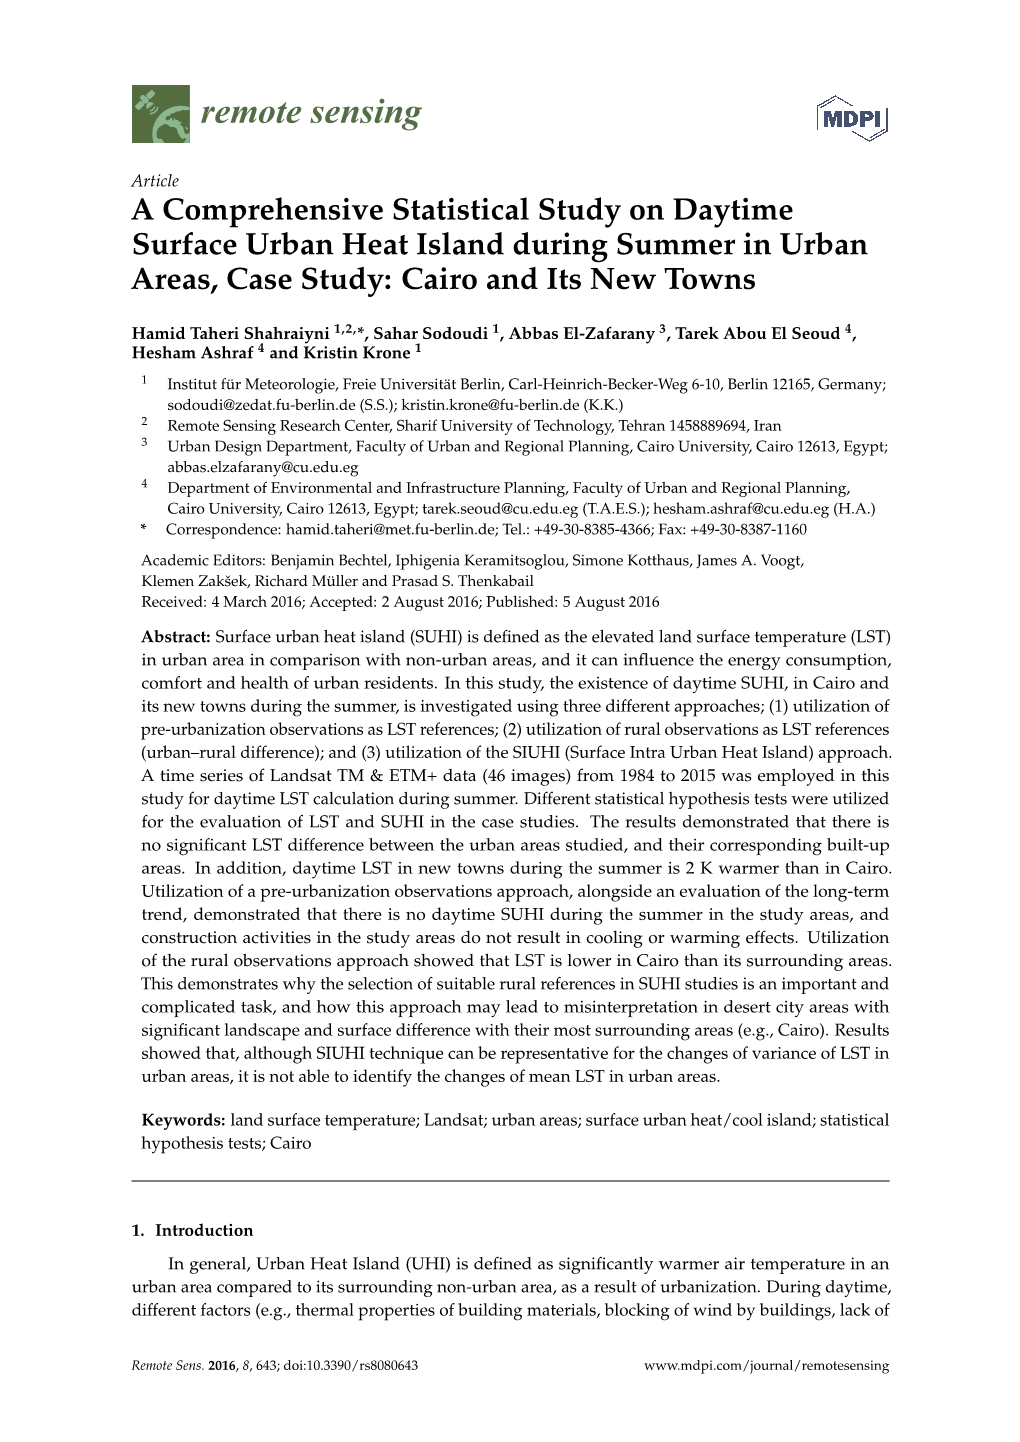 A Comprehensive Statistical Study on Daytime Surface Urban Heat Island During Summer in Urban Areas, Case Study: Cairo and Its New Towns